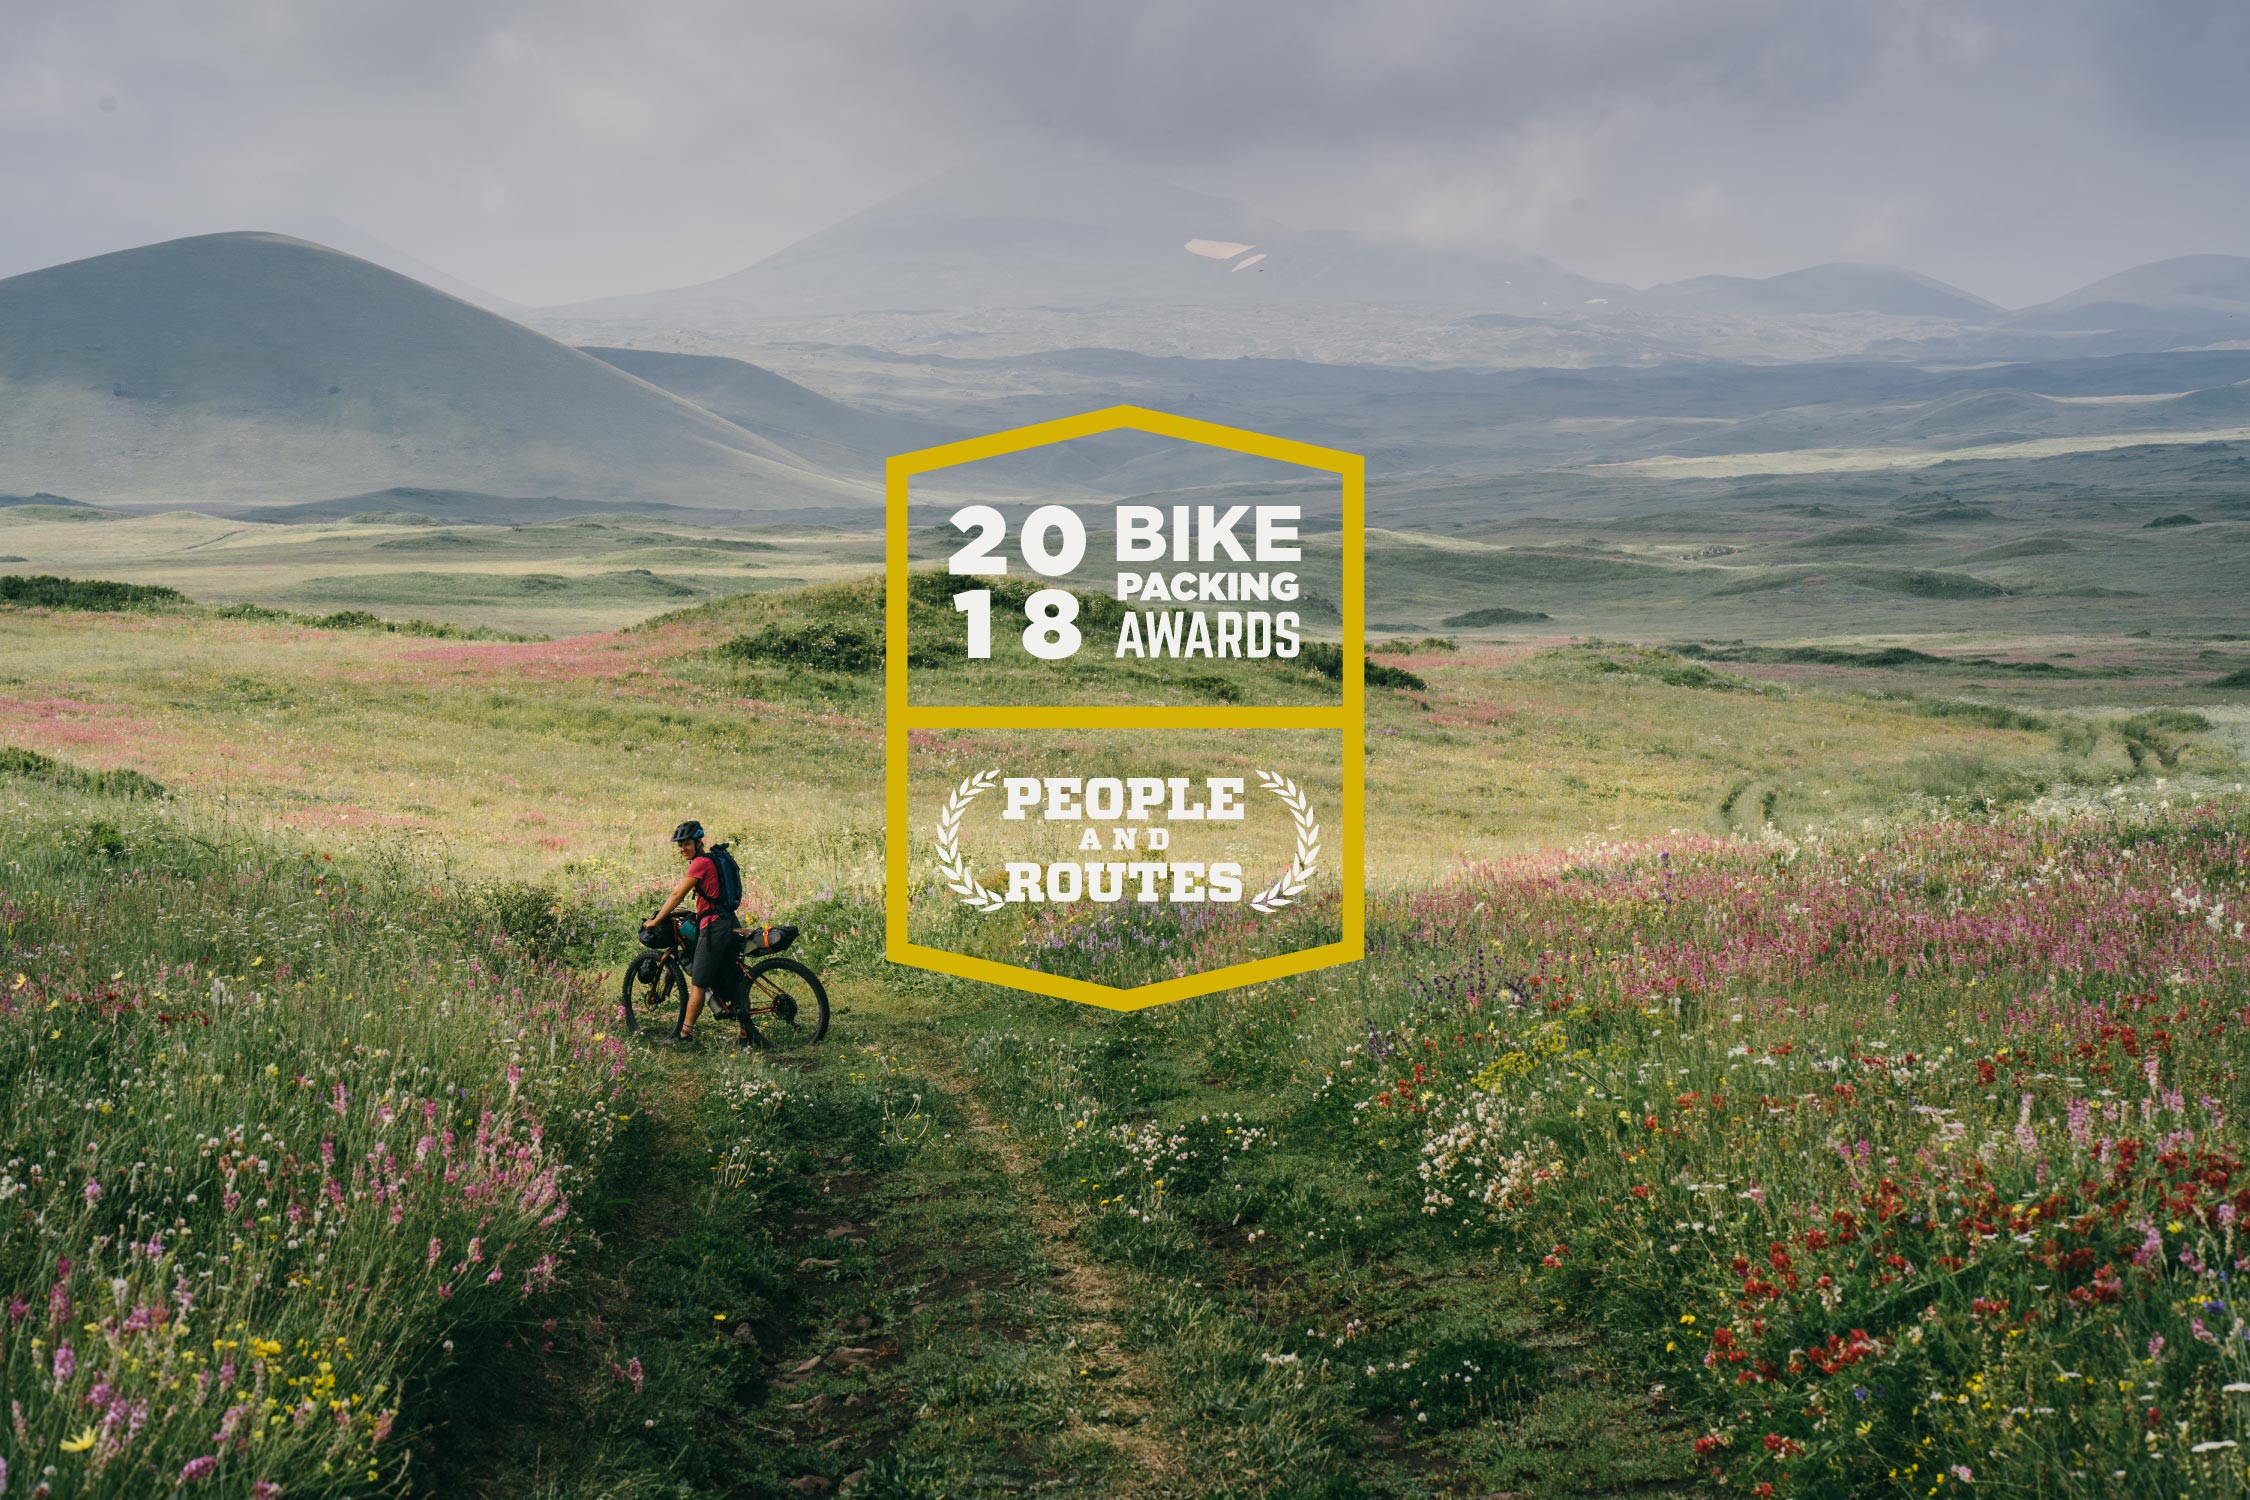 2018 Bikepacking Awards, People and Routes